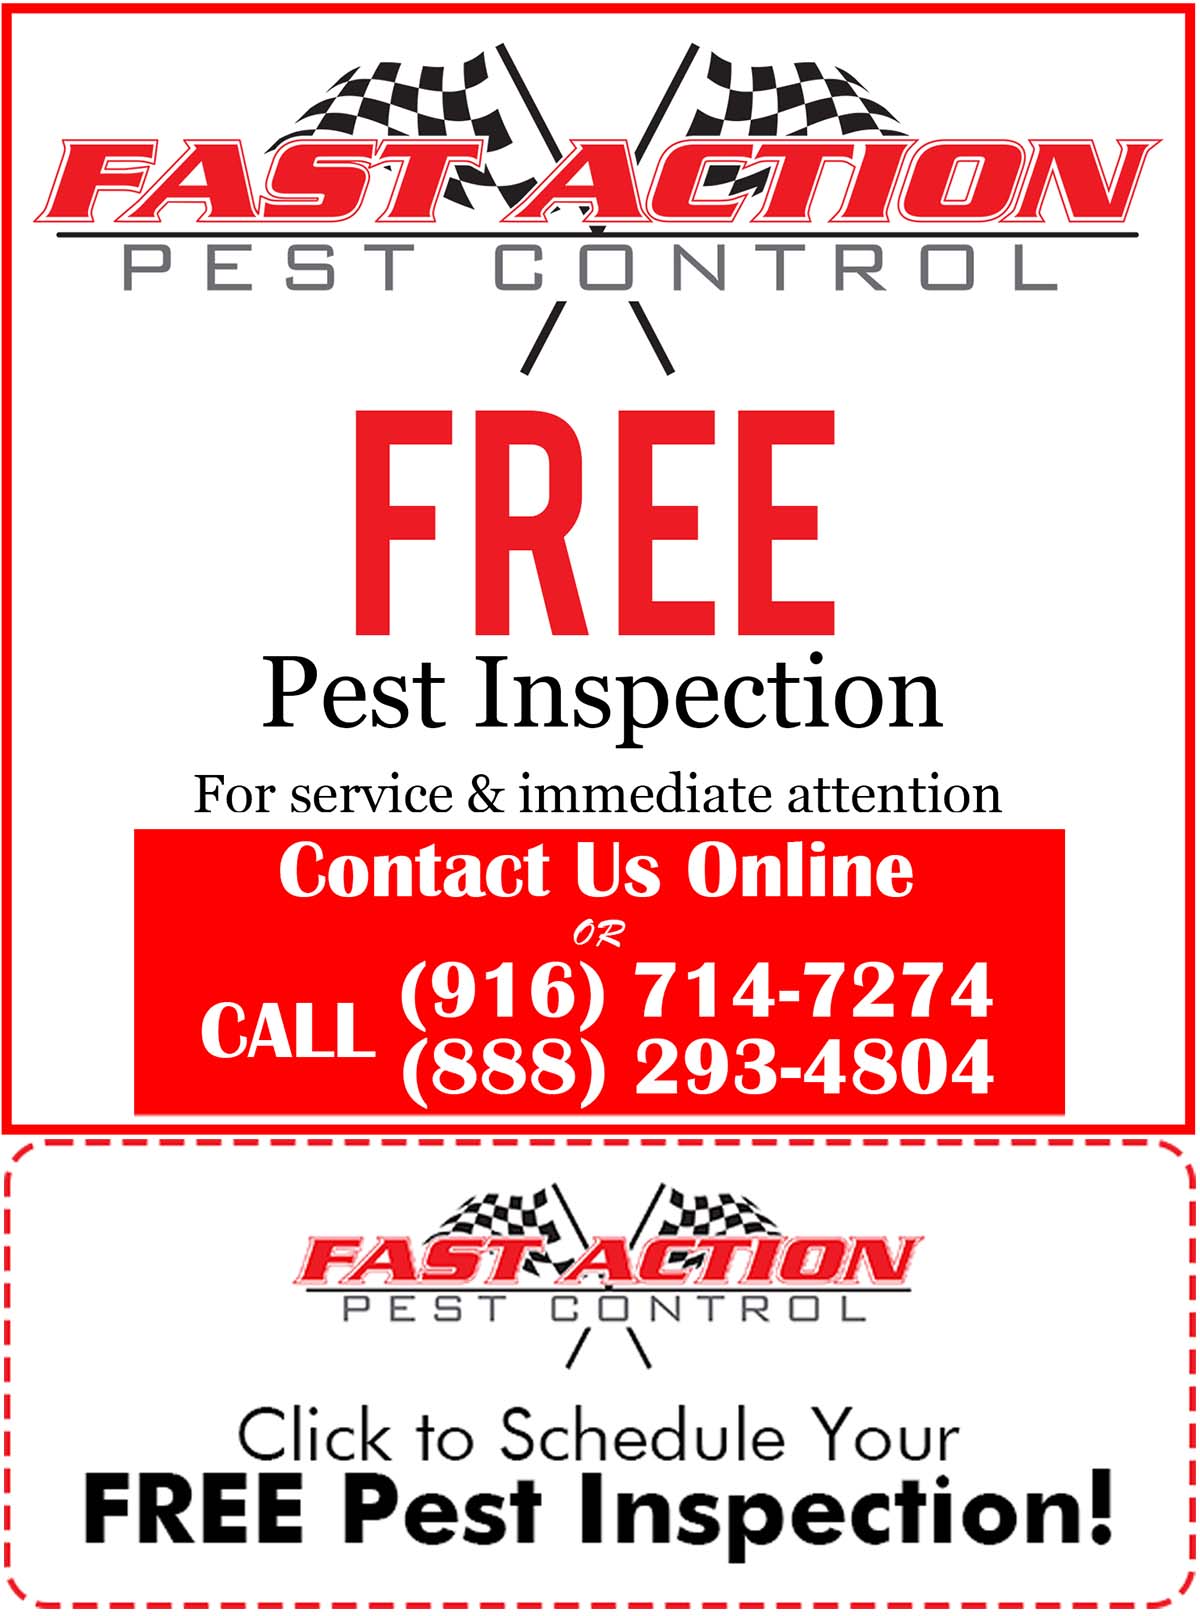 Fast Action Pest Control. Elk Grove Insect & Rodent Exterminators. Top Rated Pest Service, Best Pest Control Company in Elk Grove, CA. & surrounding